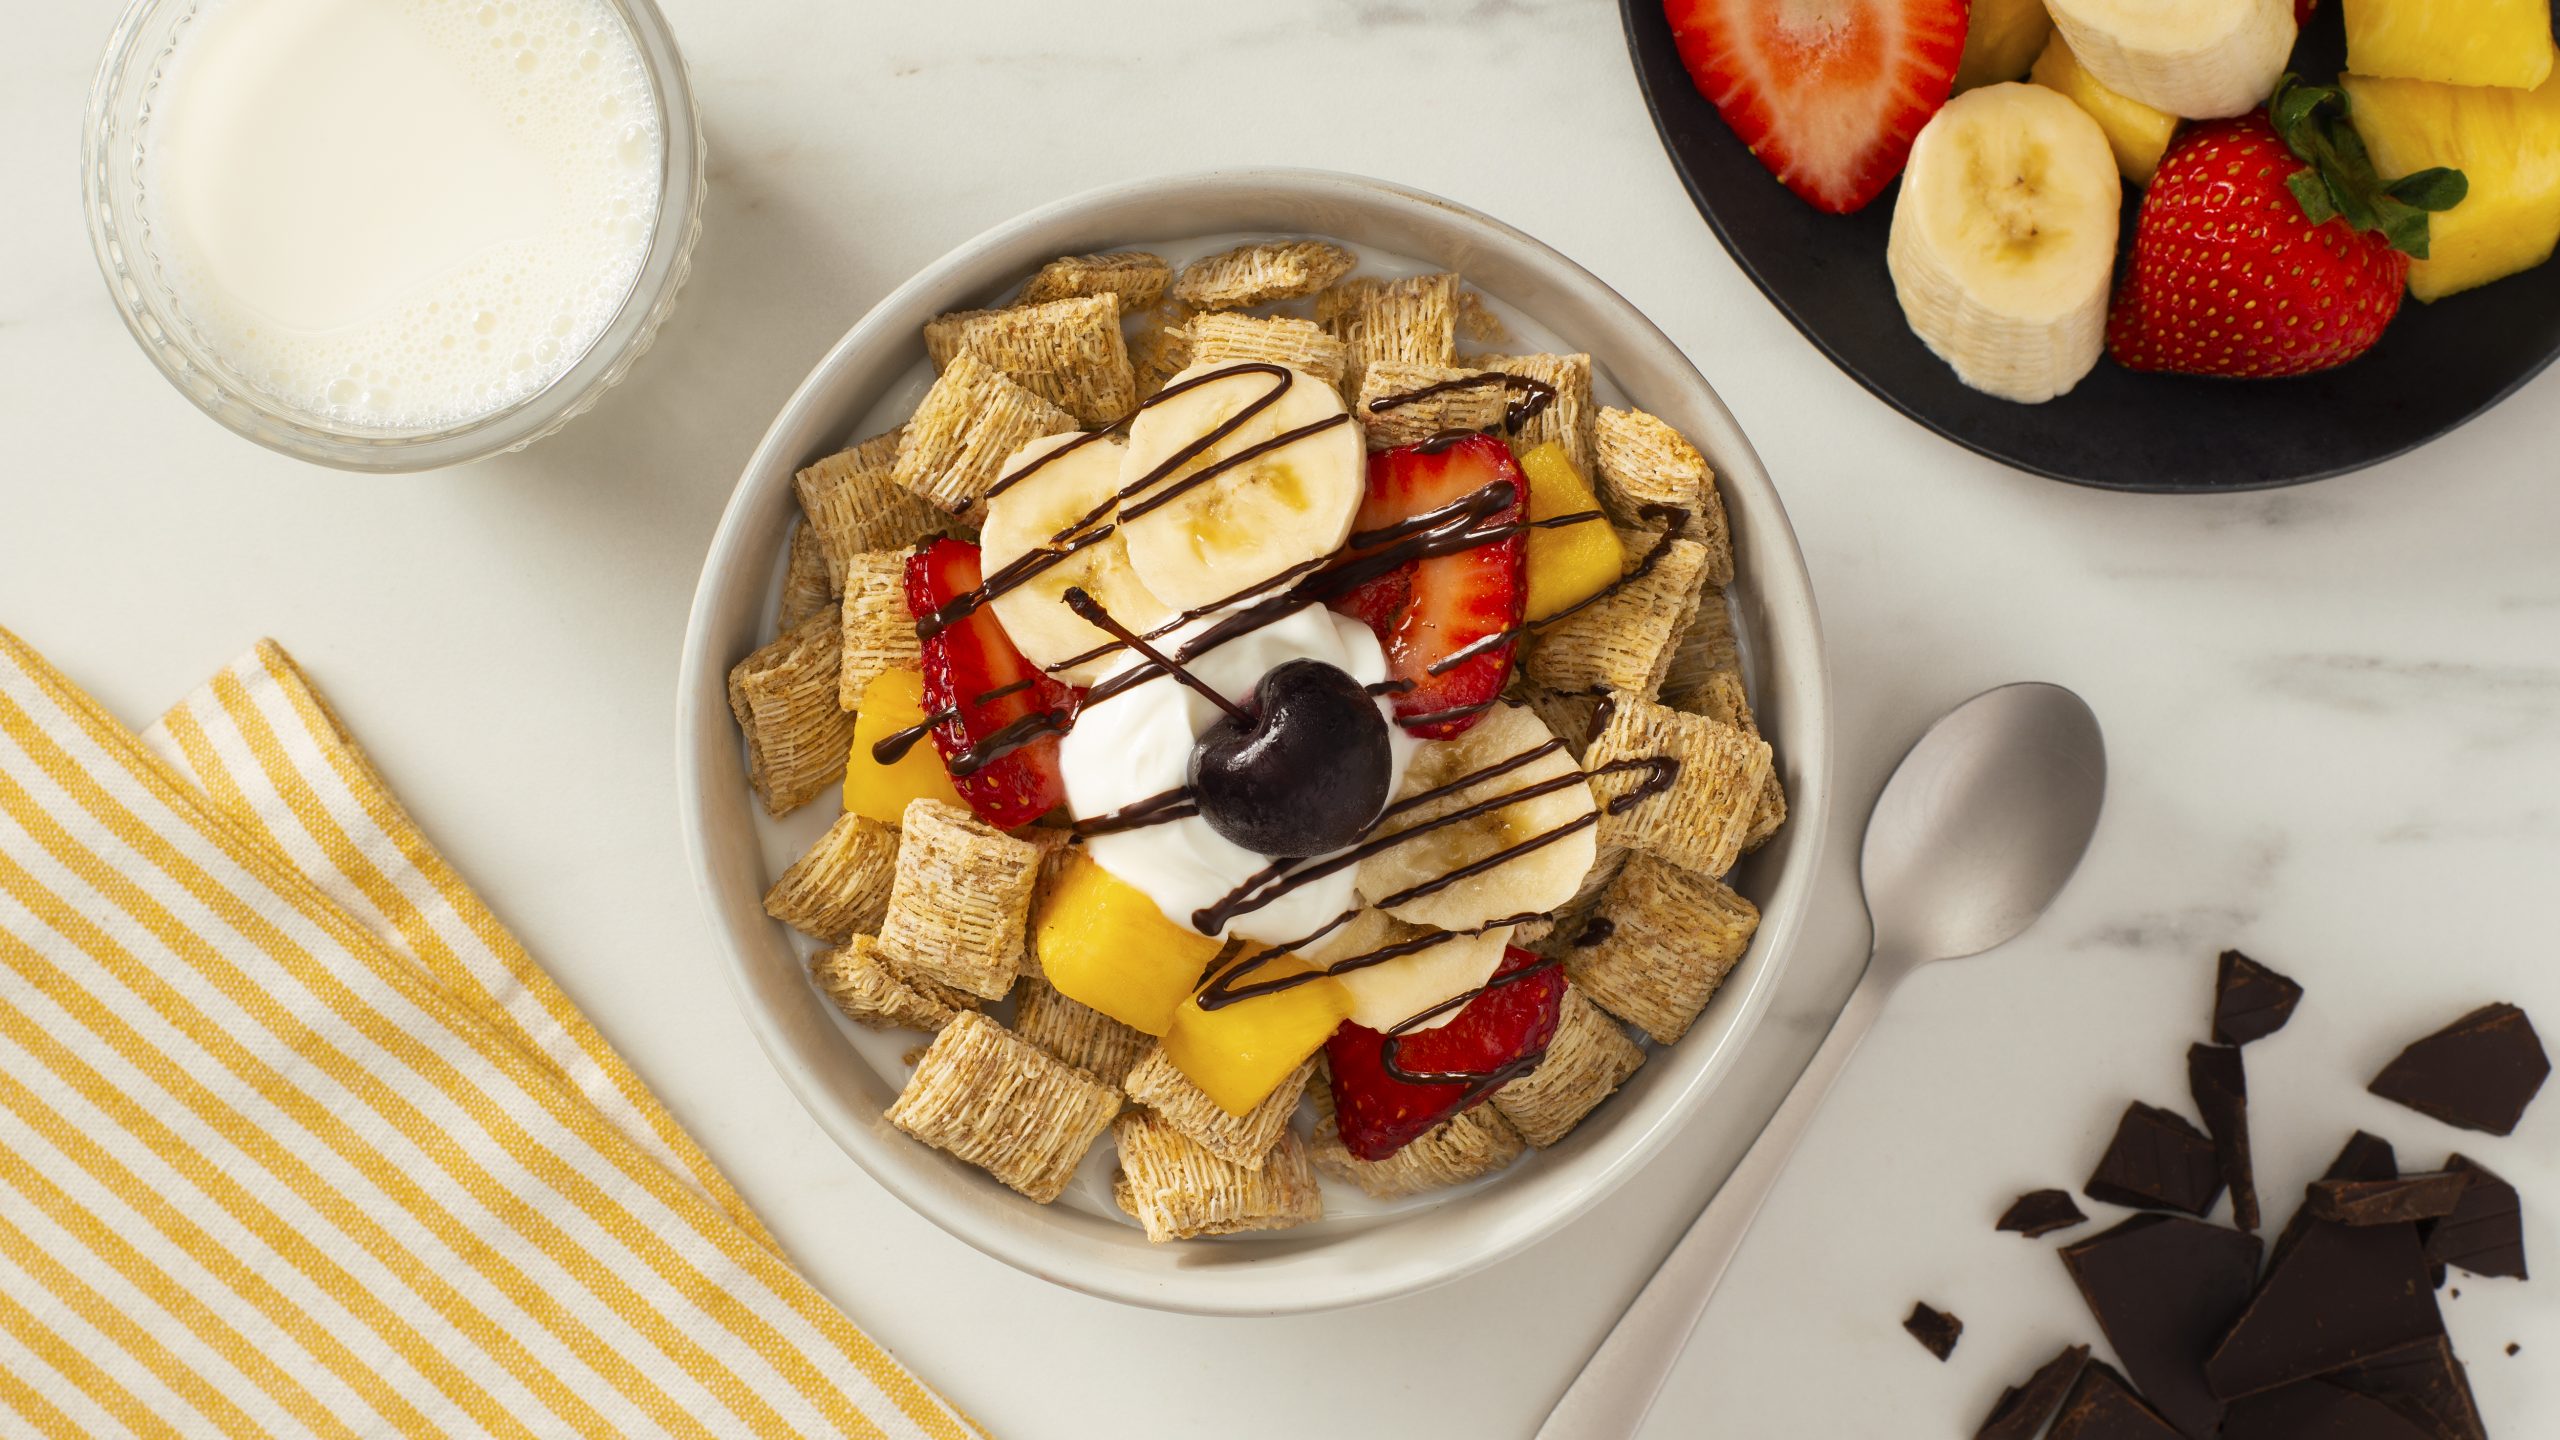 Banana Split made with Shredded Wheat in a bowl.